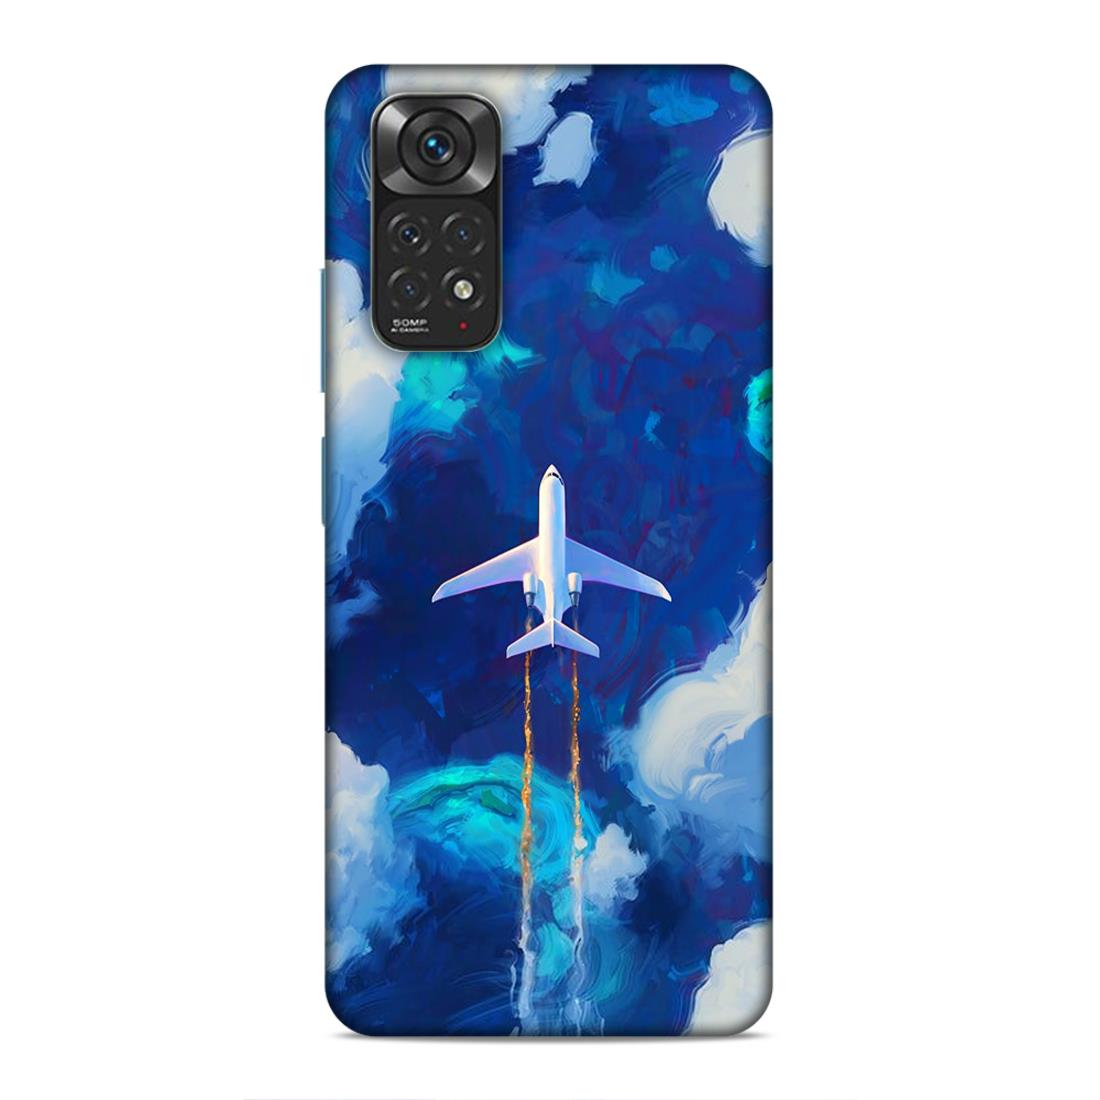 Aeroplane In The Sky Hard Back Case For Xiaomi Redmi Note 11 4G / 11s